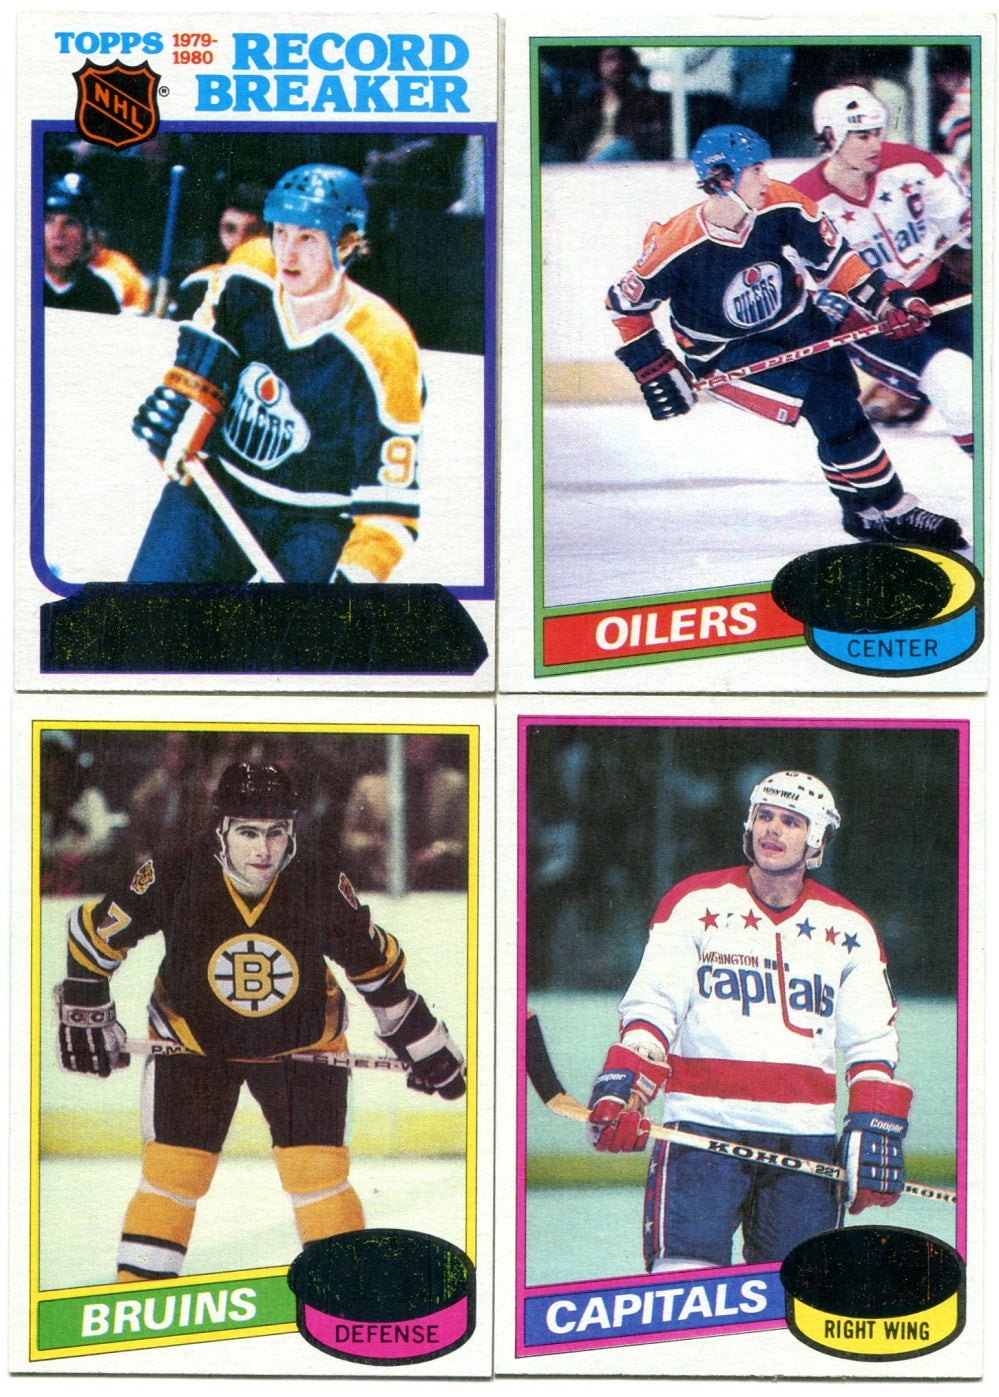 1980/81 Topps Hockey Complete EX/MT NM (264) (23-122)